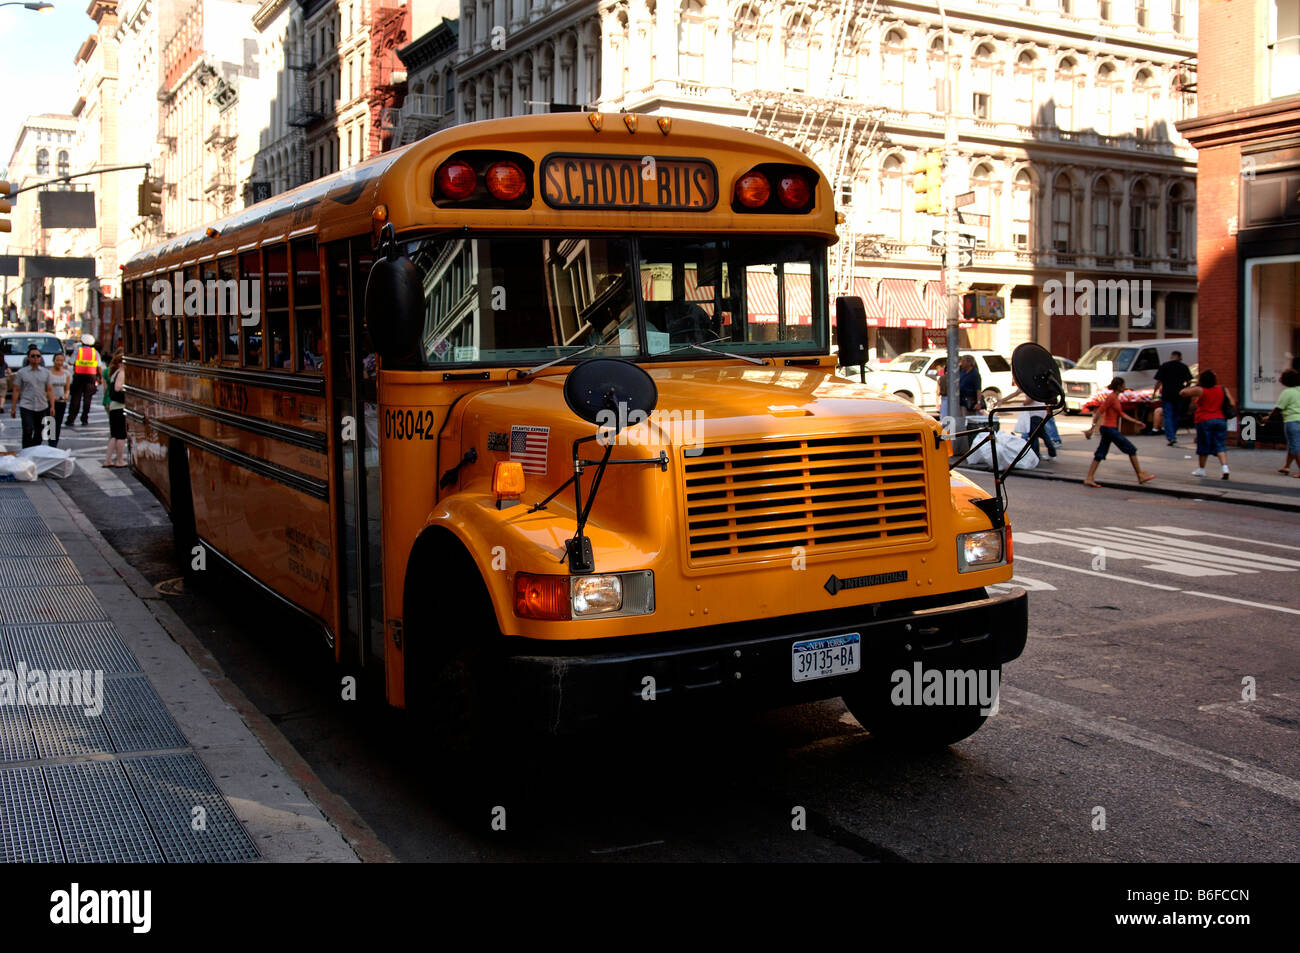 American school bus, New York City, USA Banque D'Images